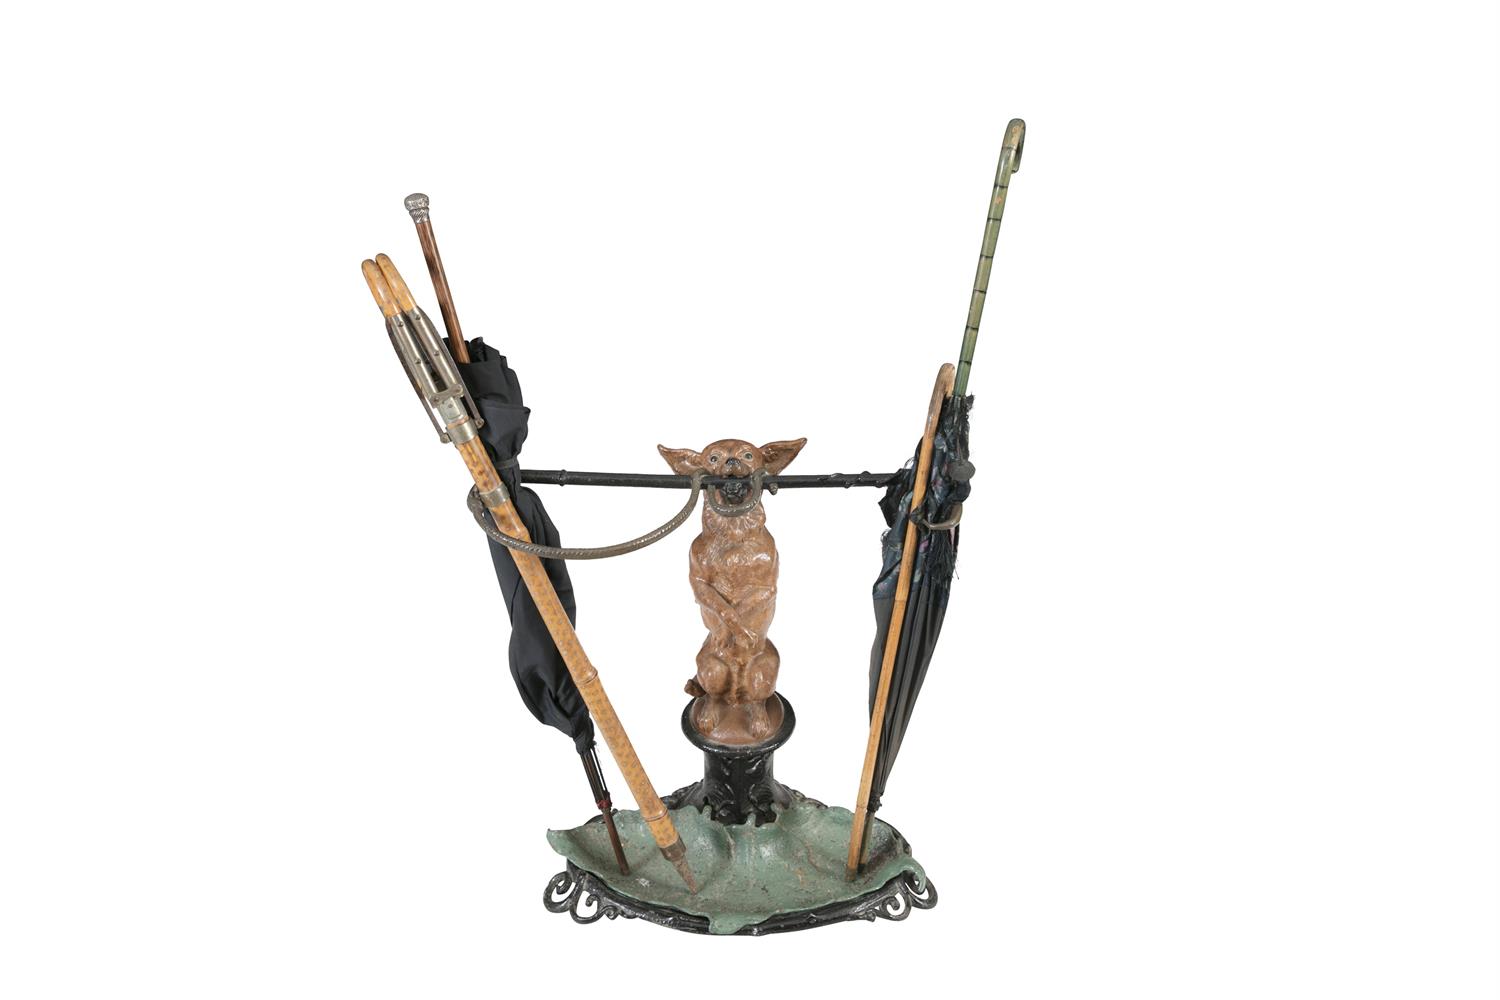 A 19TH CENTURY PAINTED CAST IRON UMBRELLA STAND AFTER COLBROOKDALE, moulded as a chihuahua dog